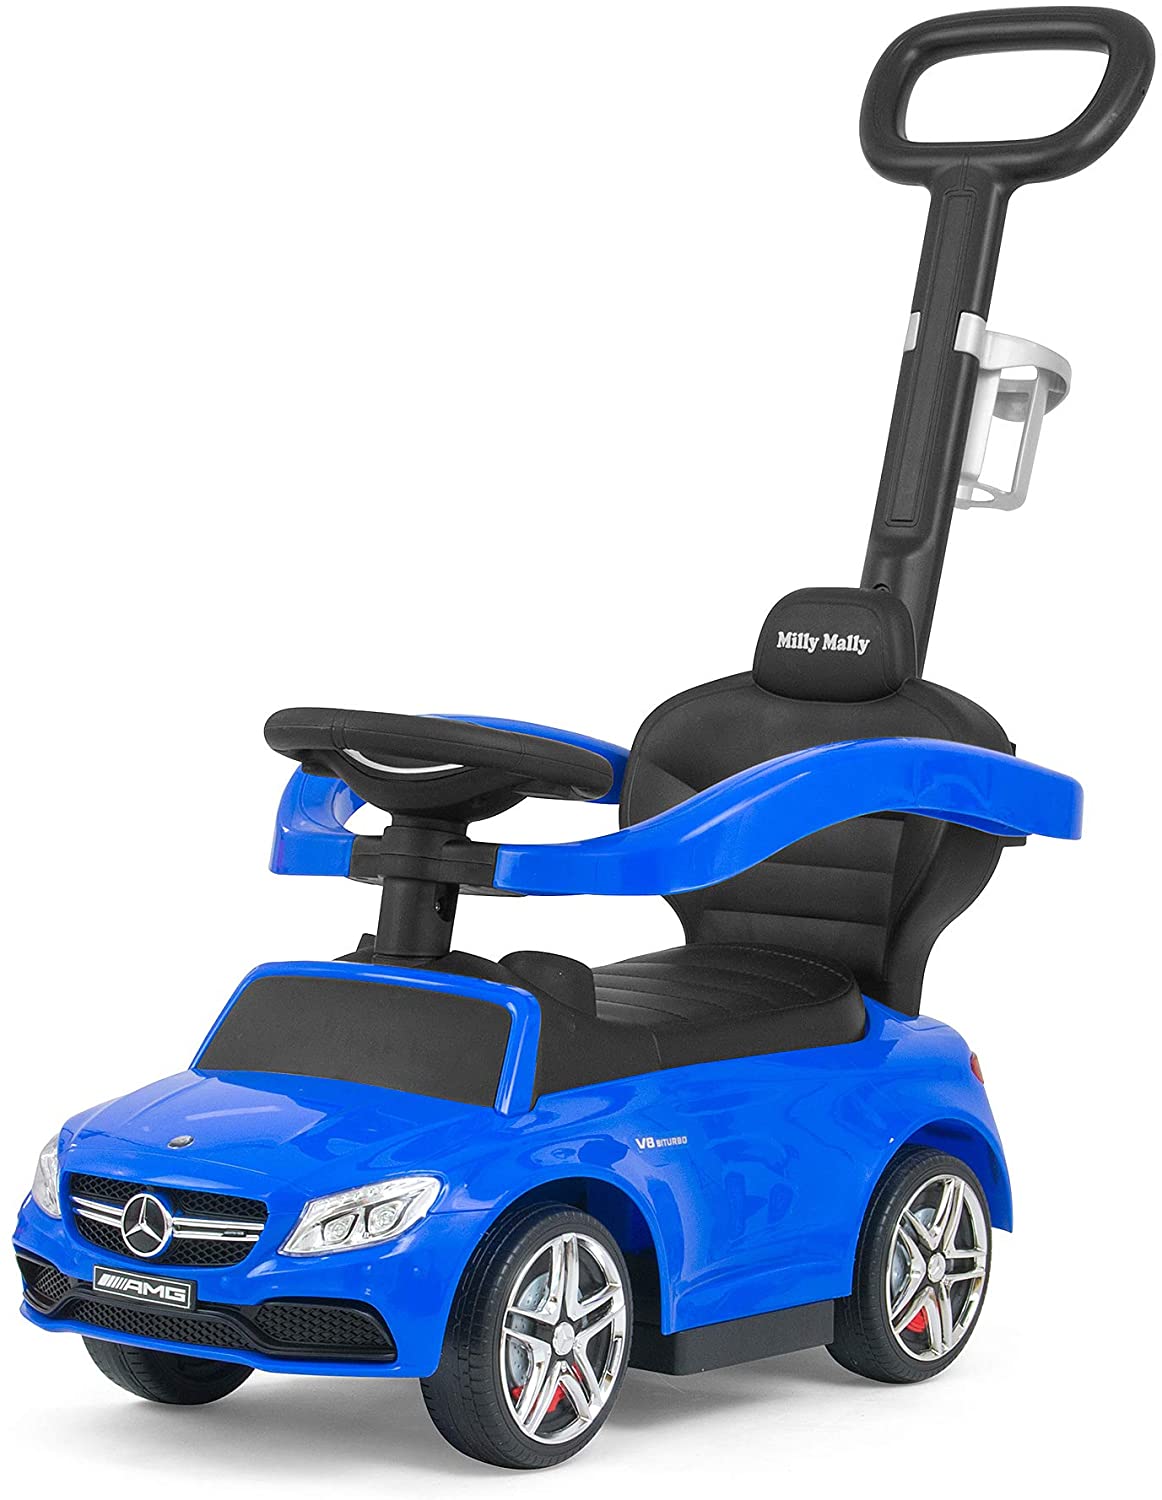 MILLY MALLY Ride-on walker pusher Mercedes